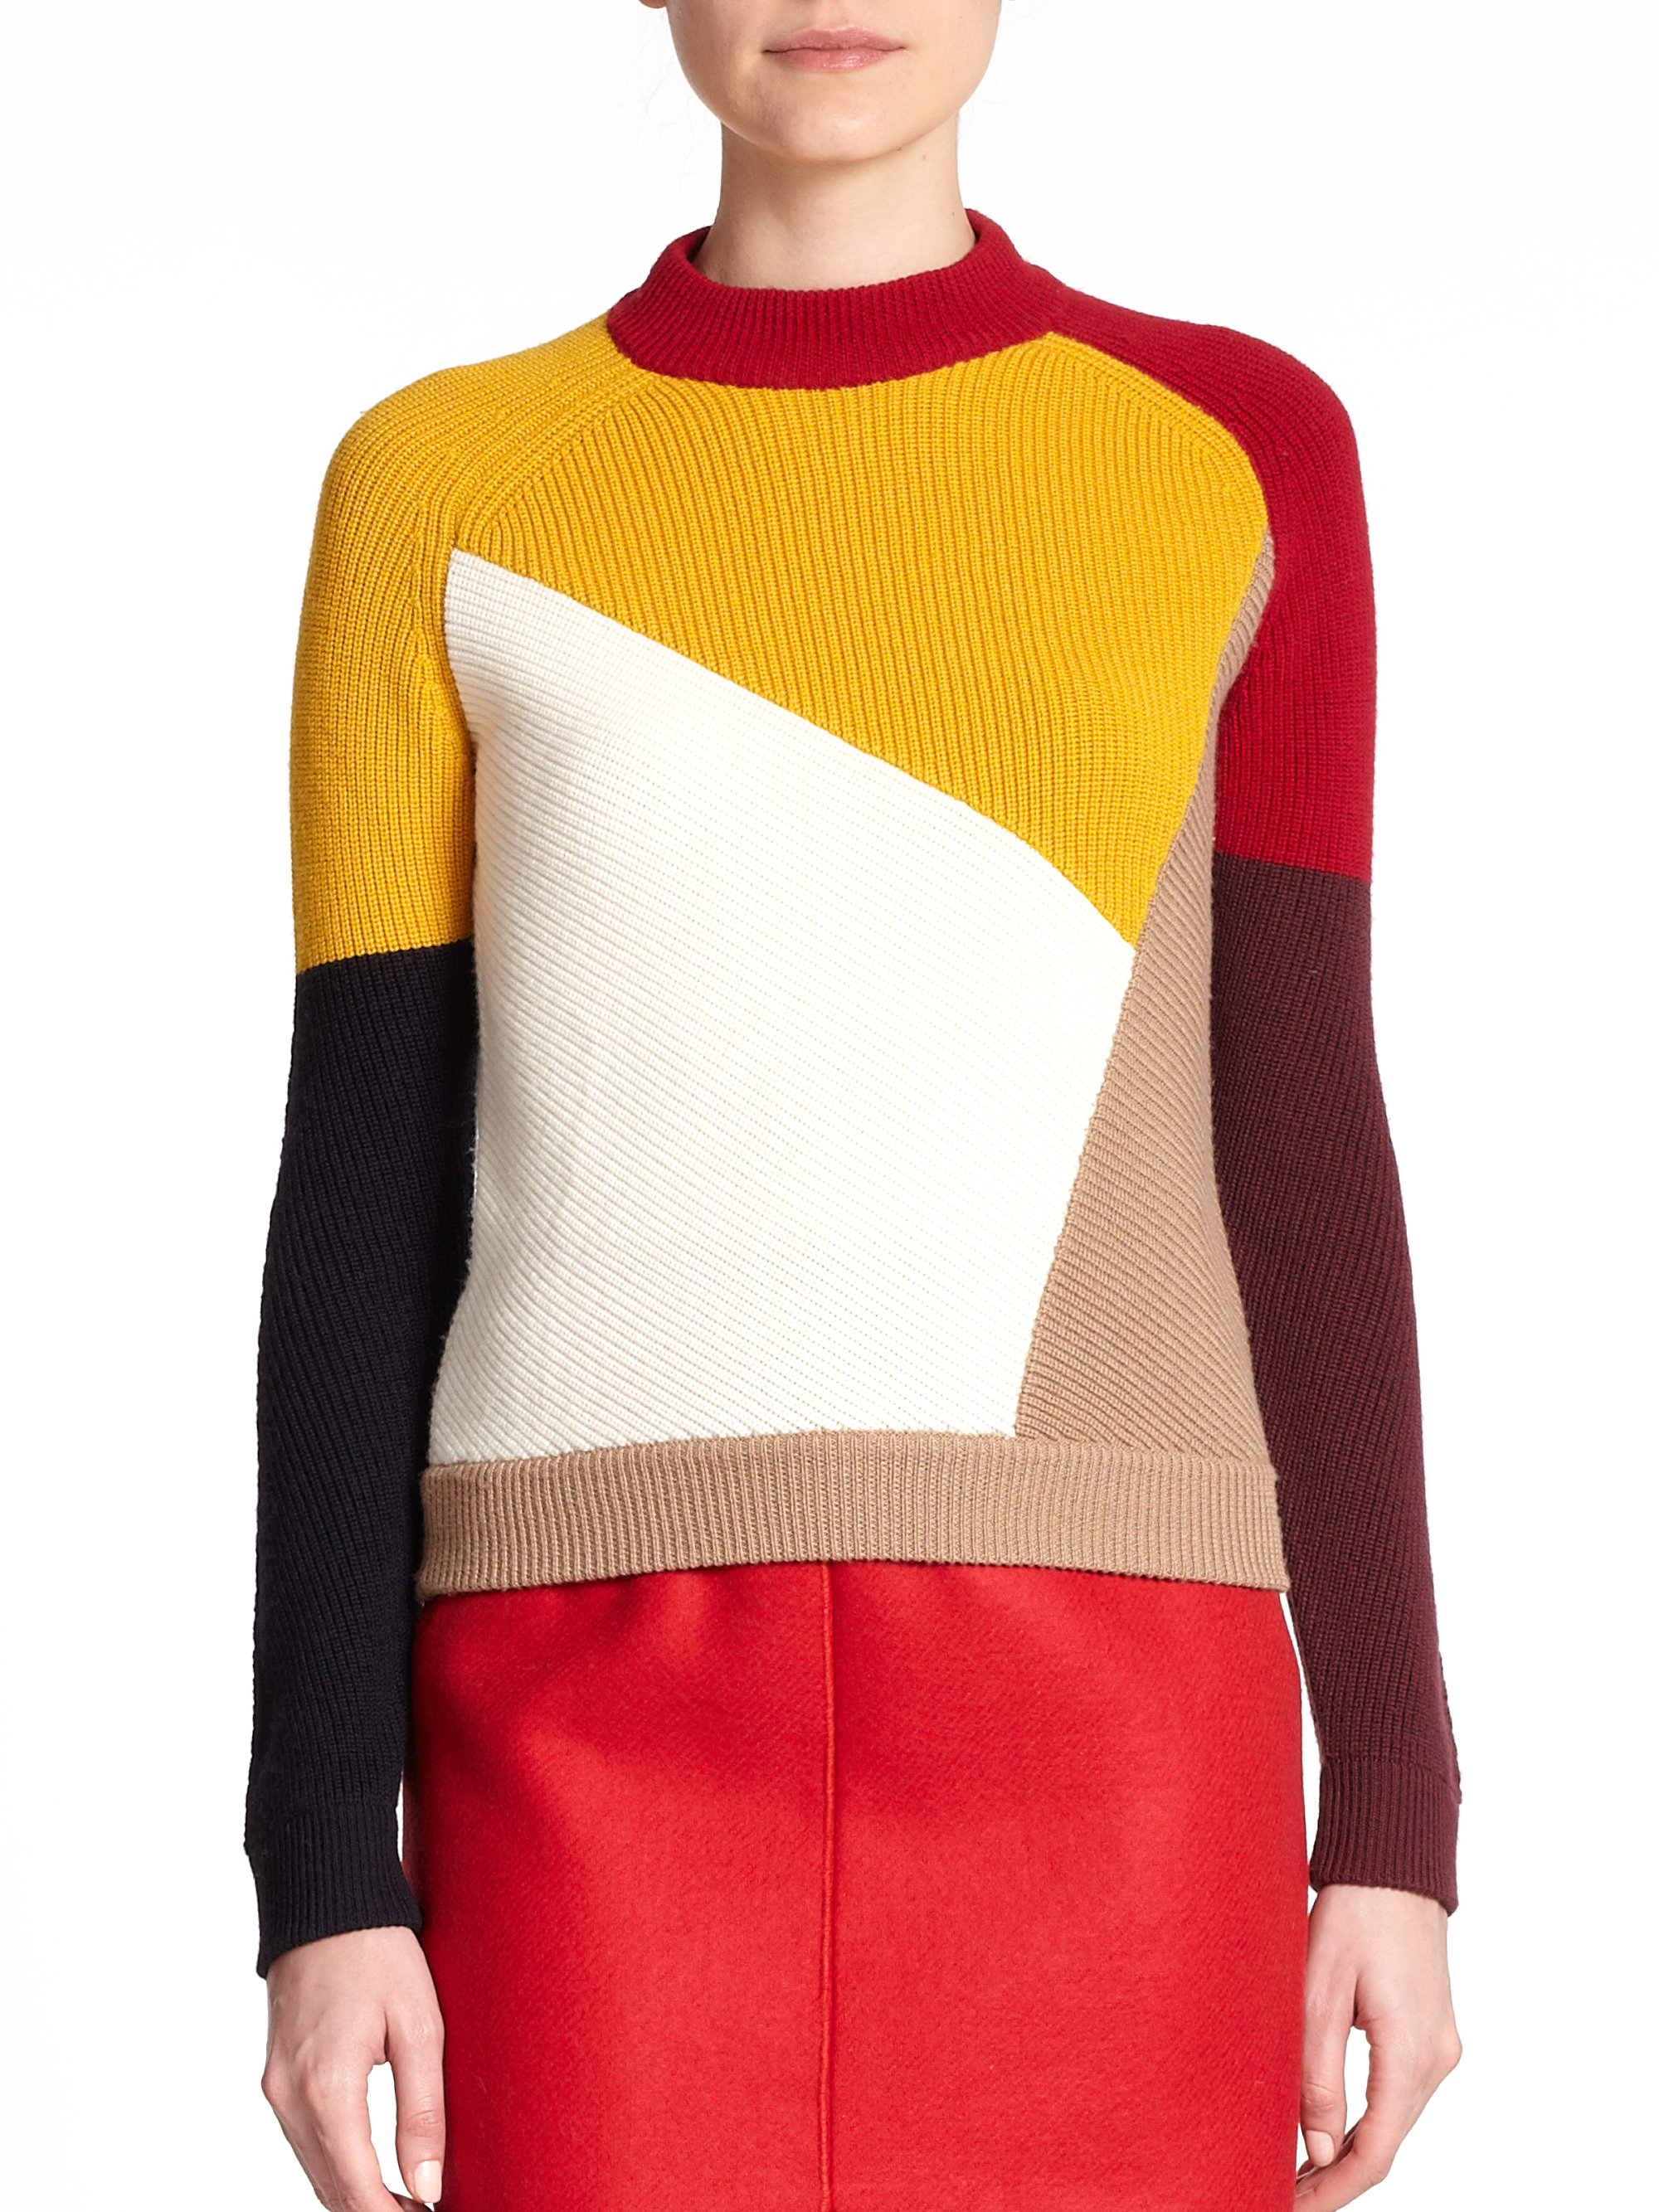 Carven Découpes Colorblock Merino Wool Sweater in Multicolor | Lyst